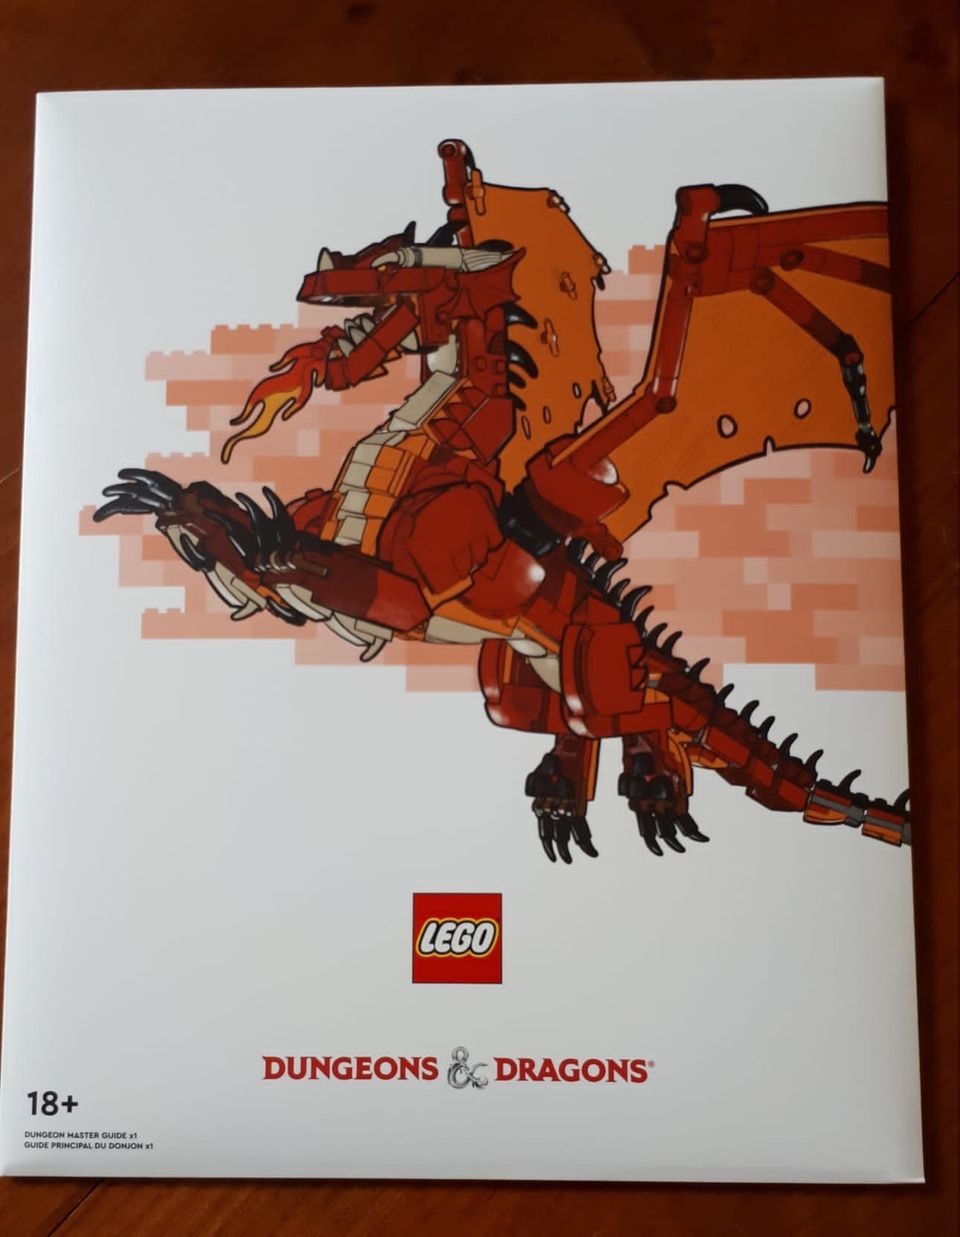 Red dragon's tale a Lego adventure